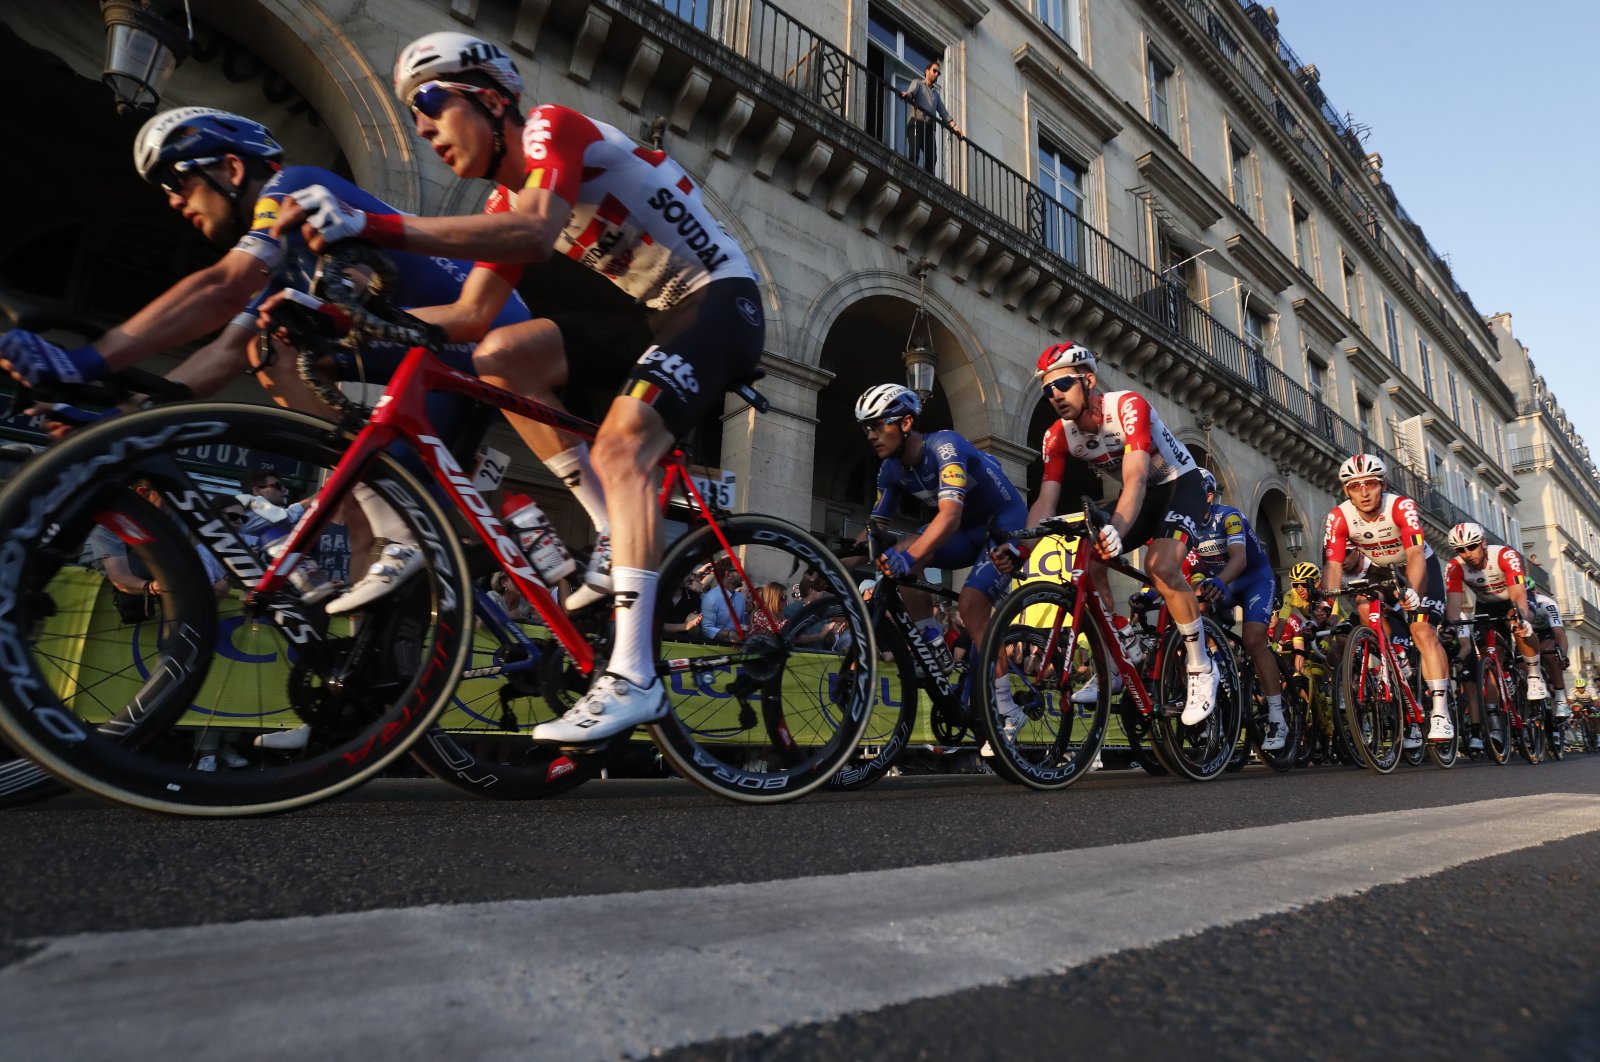 The pack cycles through the streets of Paris during the 21st stage of the Tour de France cycling race in Paris, France, July 28, 2019. (AP Photo)